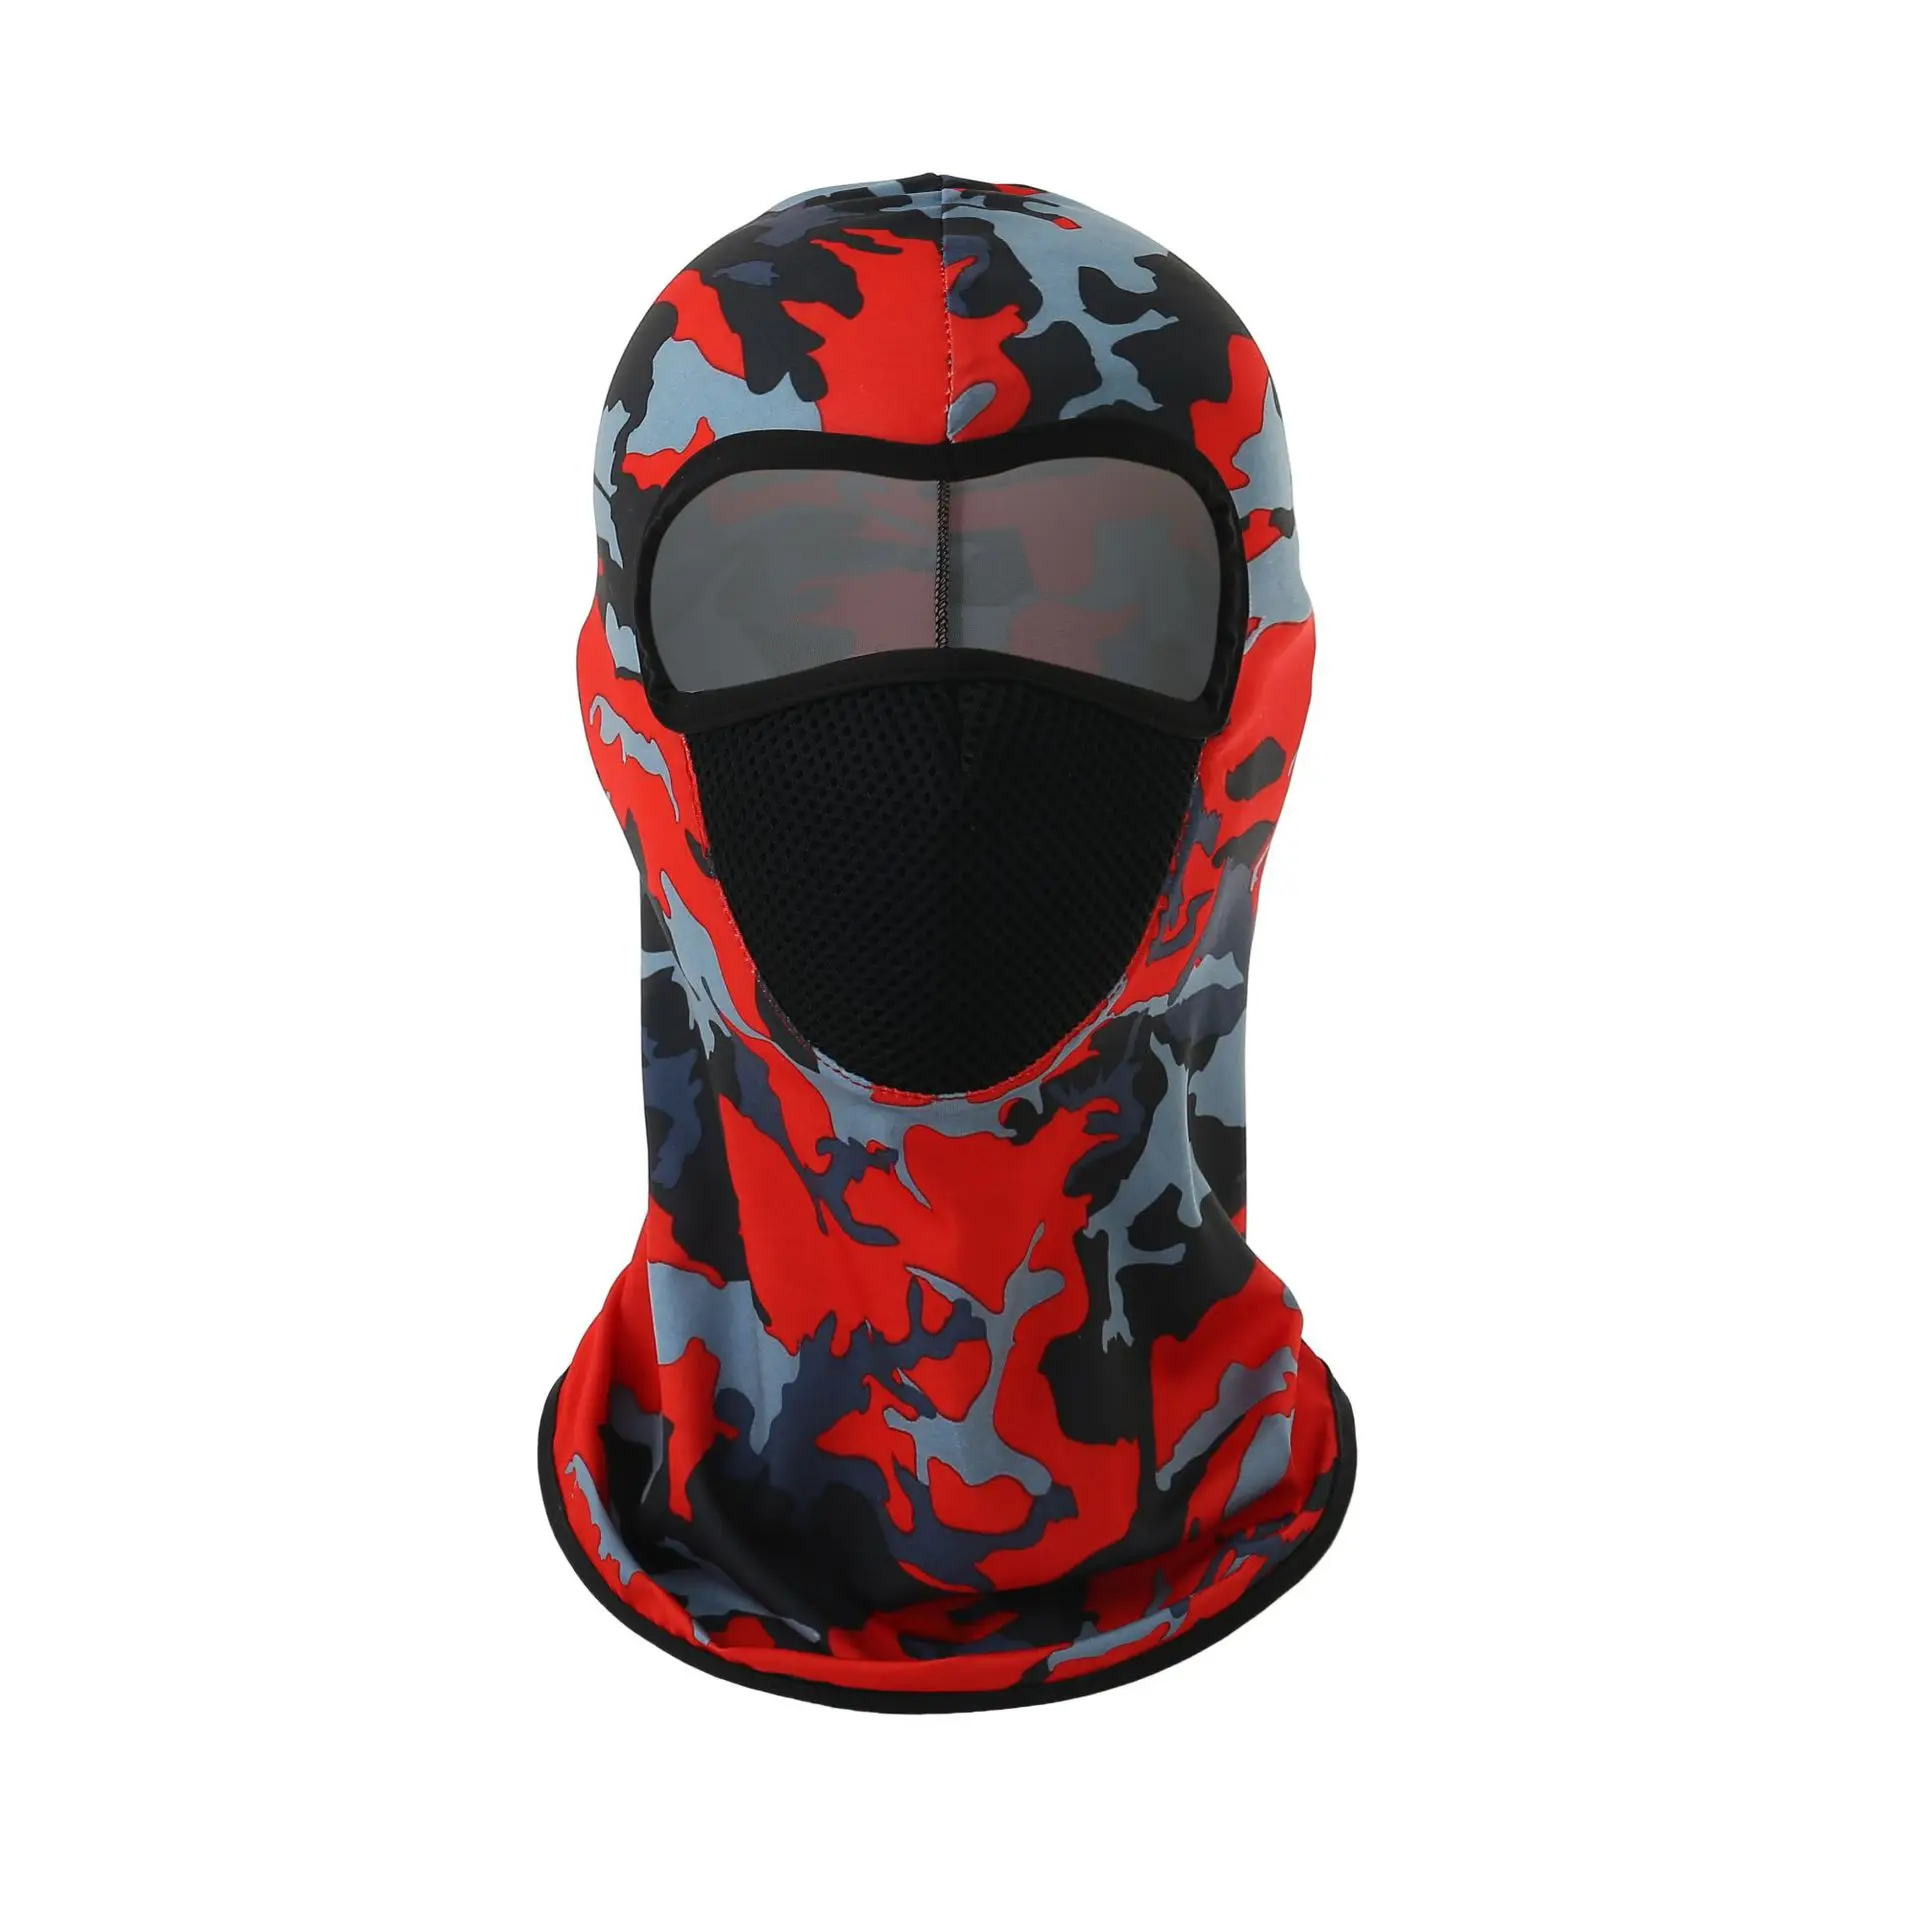 

Balaclava Face Mask Camouflage Sun Hood Tactical Lightweight Ski Motorcycle Cycling Running UV Protection for Men Women, As the photo shows